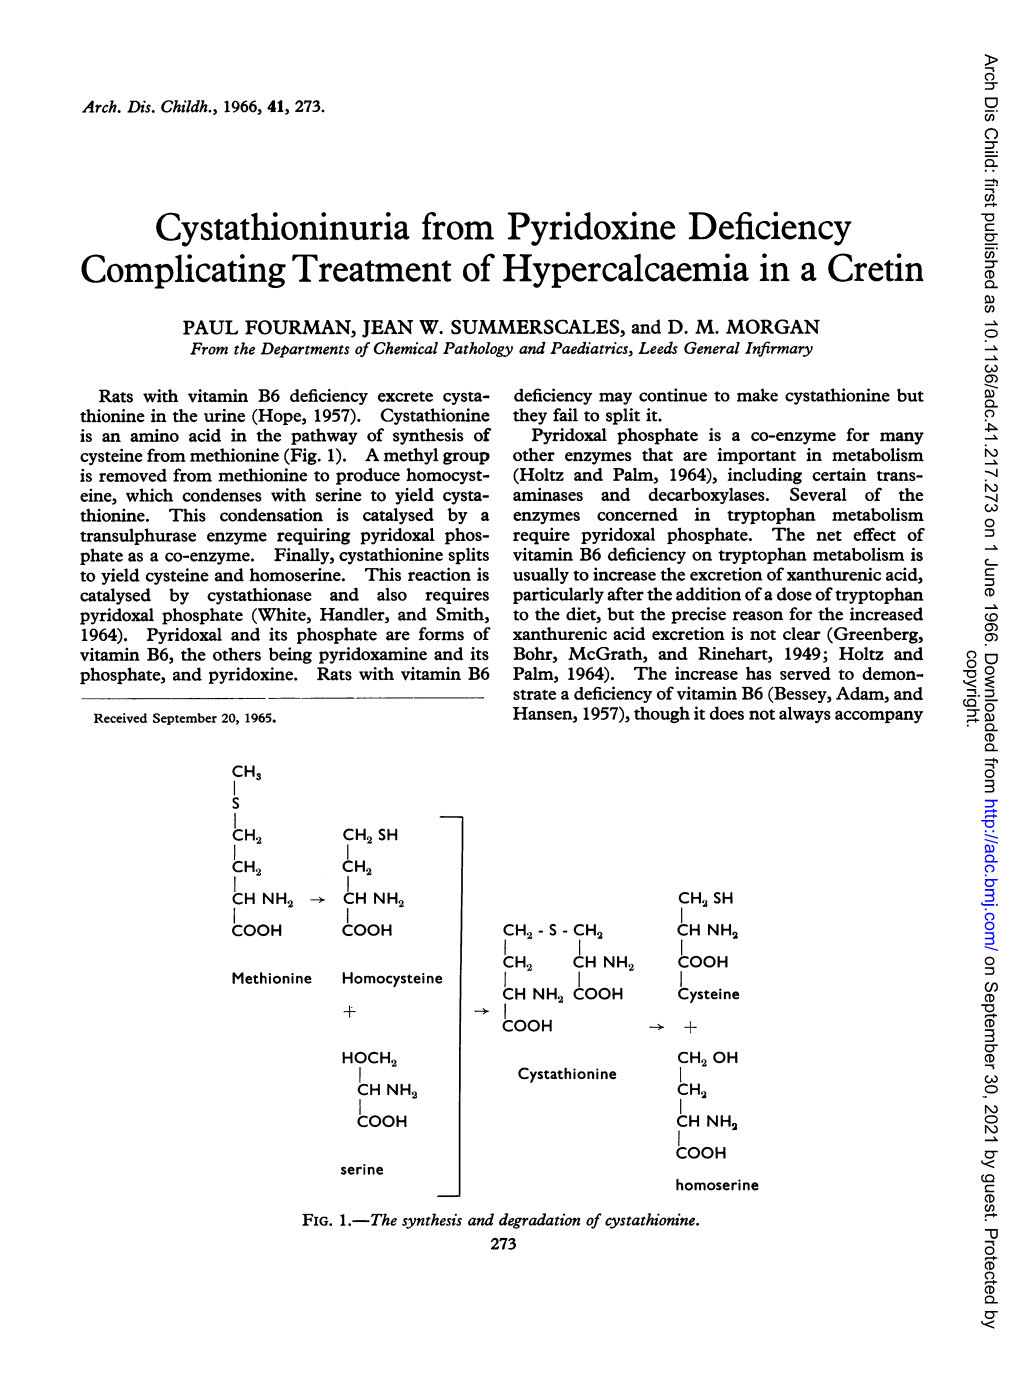 Cystathioninuria from Pyridoxine Deficiency Complicating Treatment of Hypercalcaemia in a Cretin